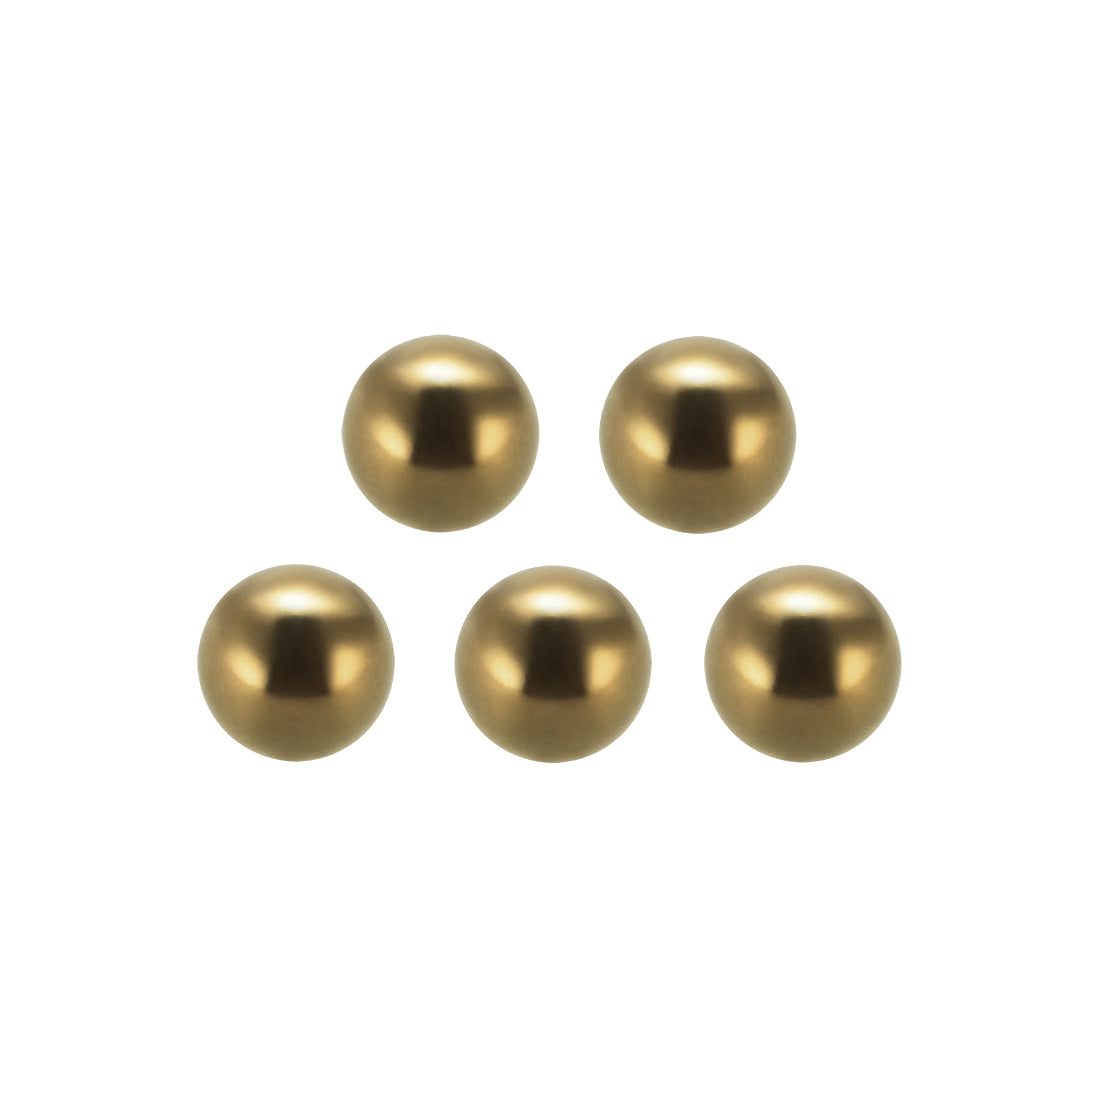 Uxcell Uxcell 3/8" Precision Solid Brass Bearing Balls 25pcs